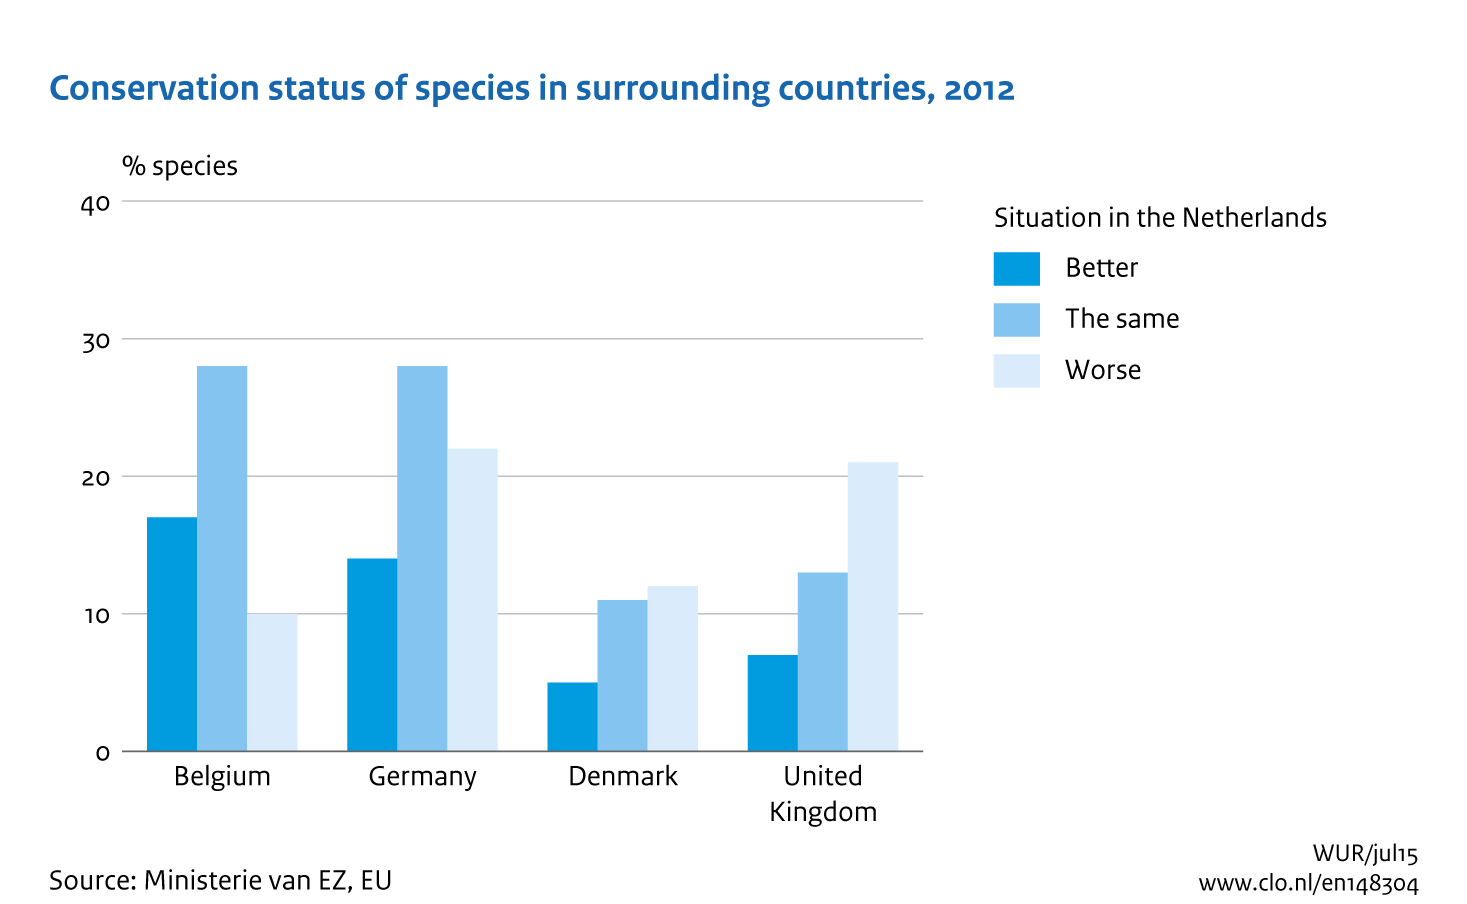 Image Conservation status of species in surrounding countries. The image is further explained in the text.